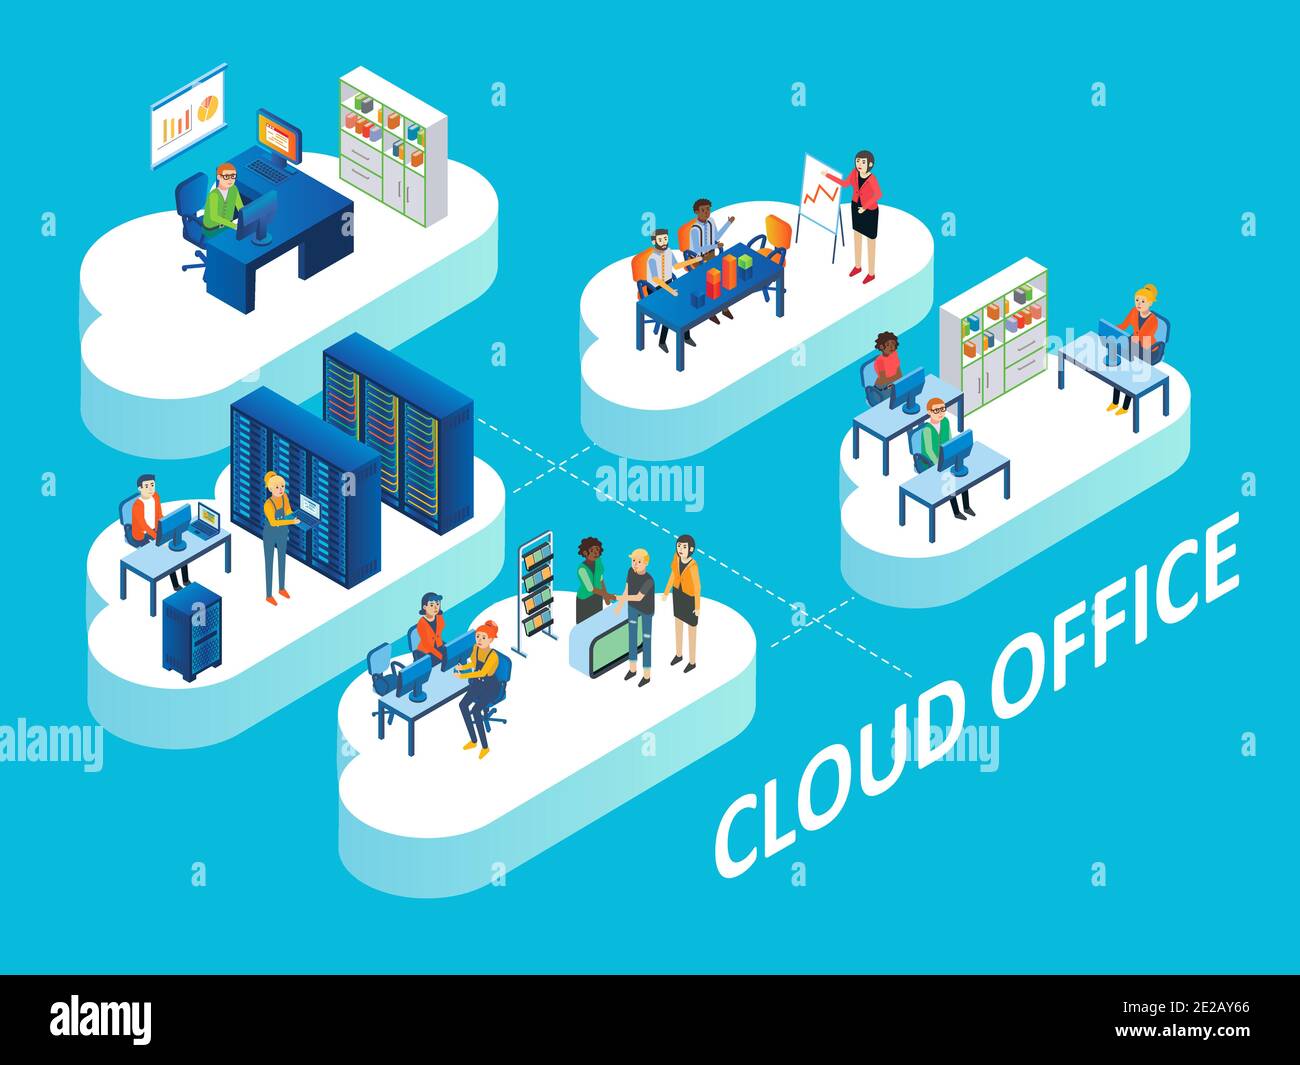 Cloud office concept vector isometric illustration Stock Vector